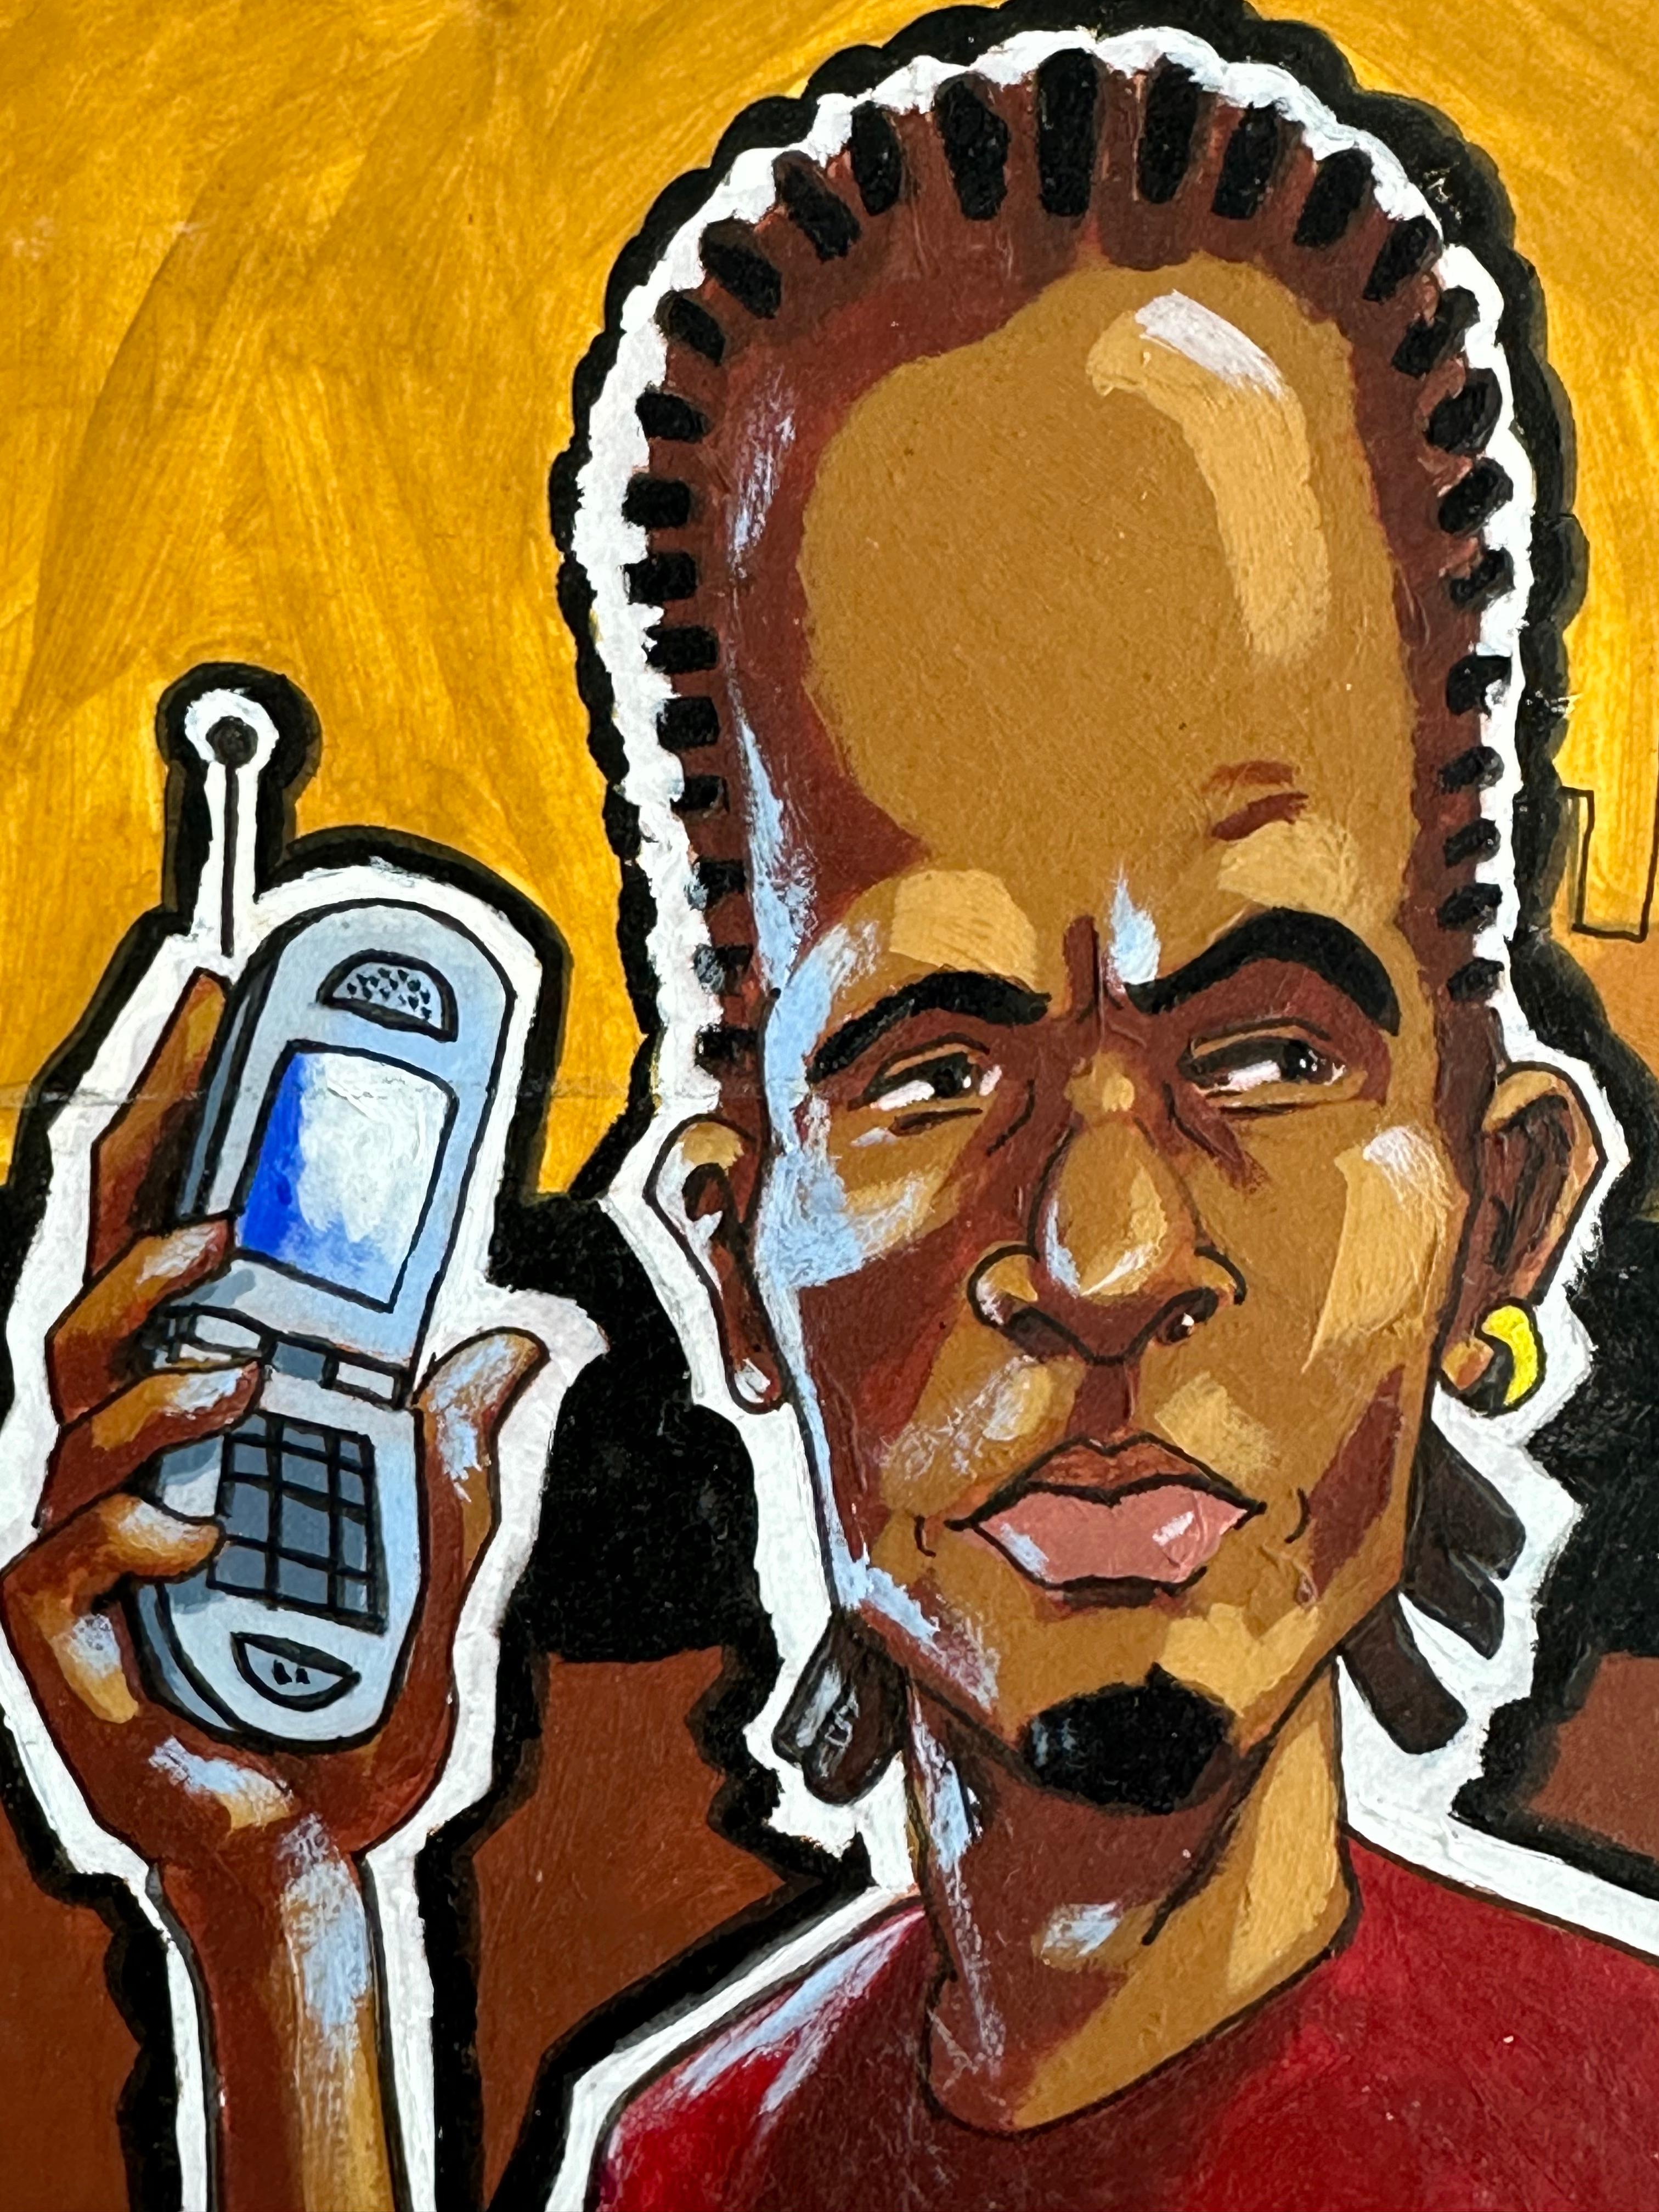 Beautiful painting depicts a young black man holding skull and flip phone. Gouache on illustration board, image measuring 8 x 10 inches; 16 x 20 inches framed. Signed lower left. 